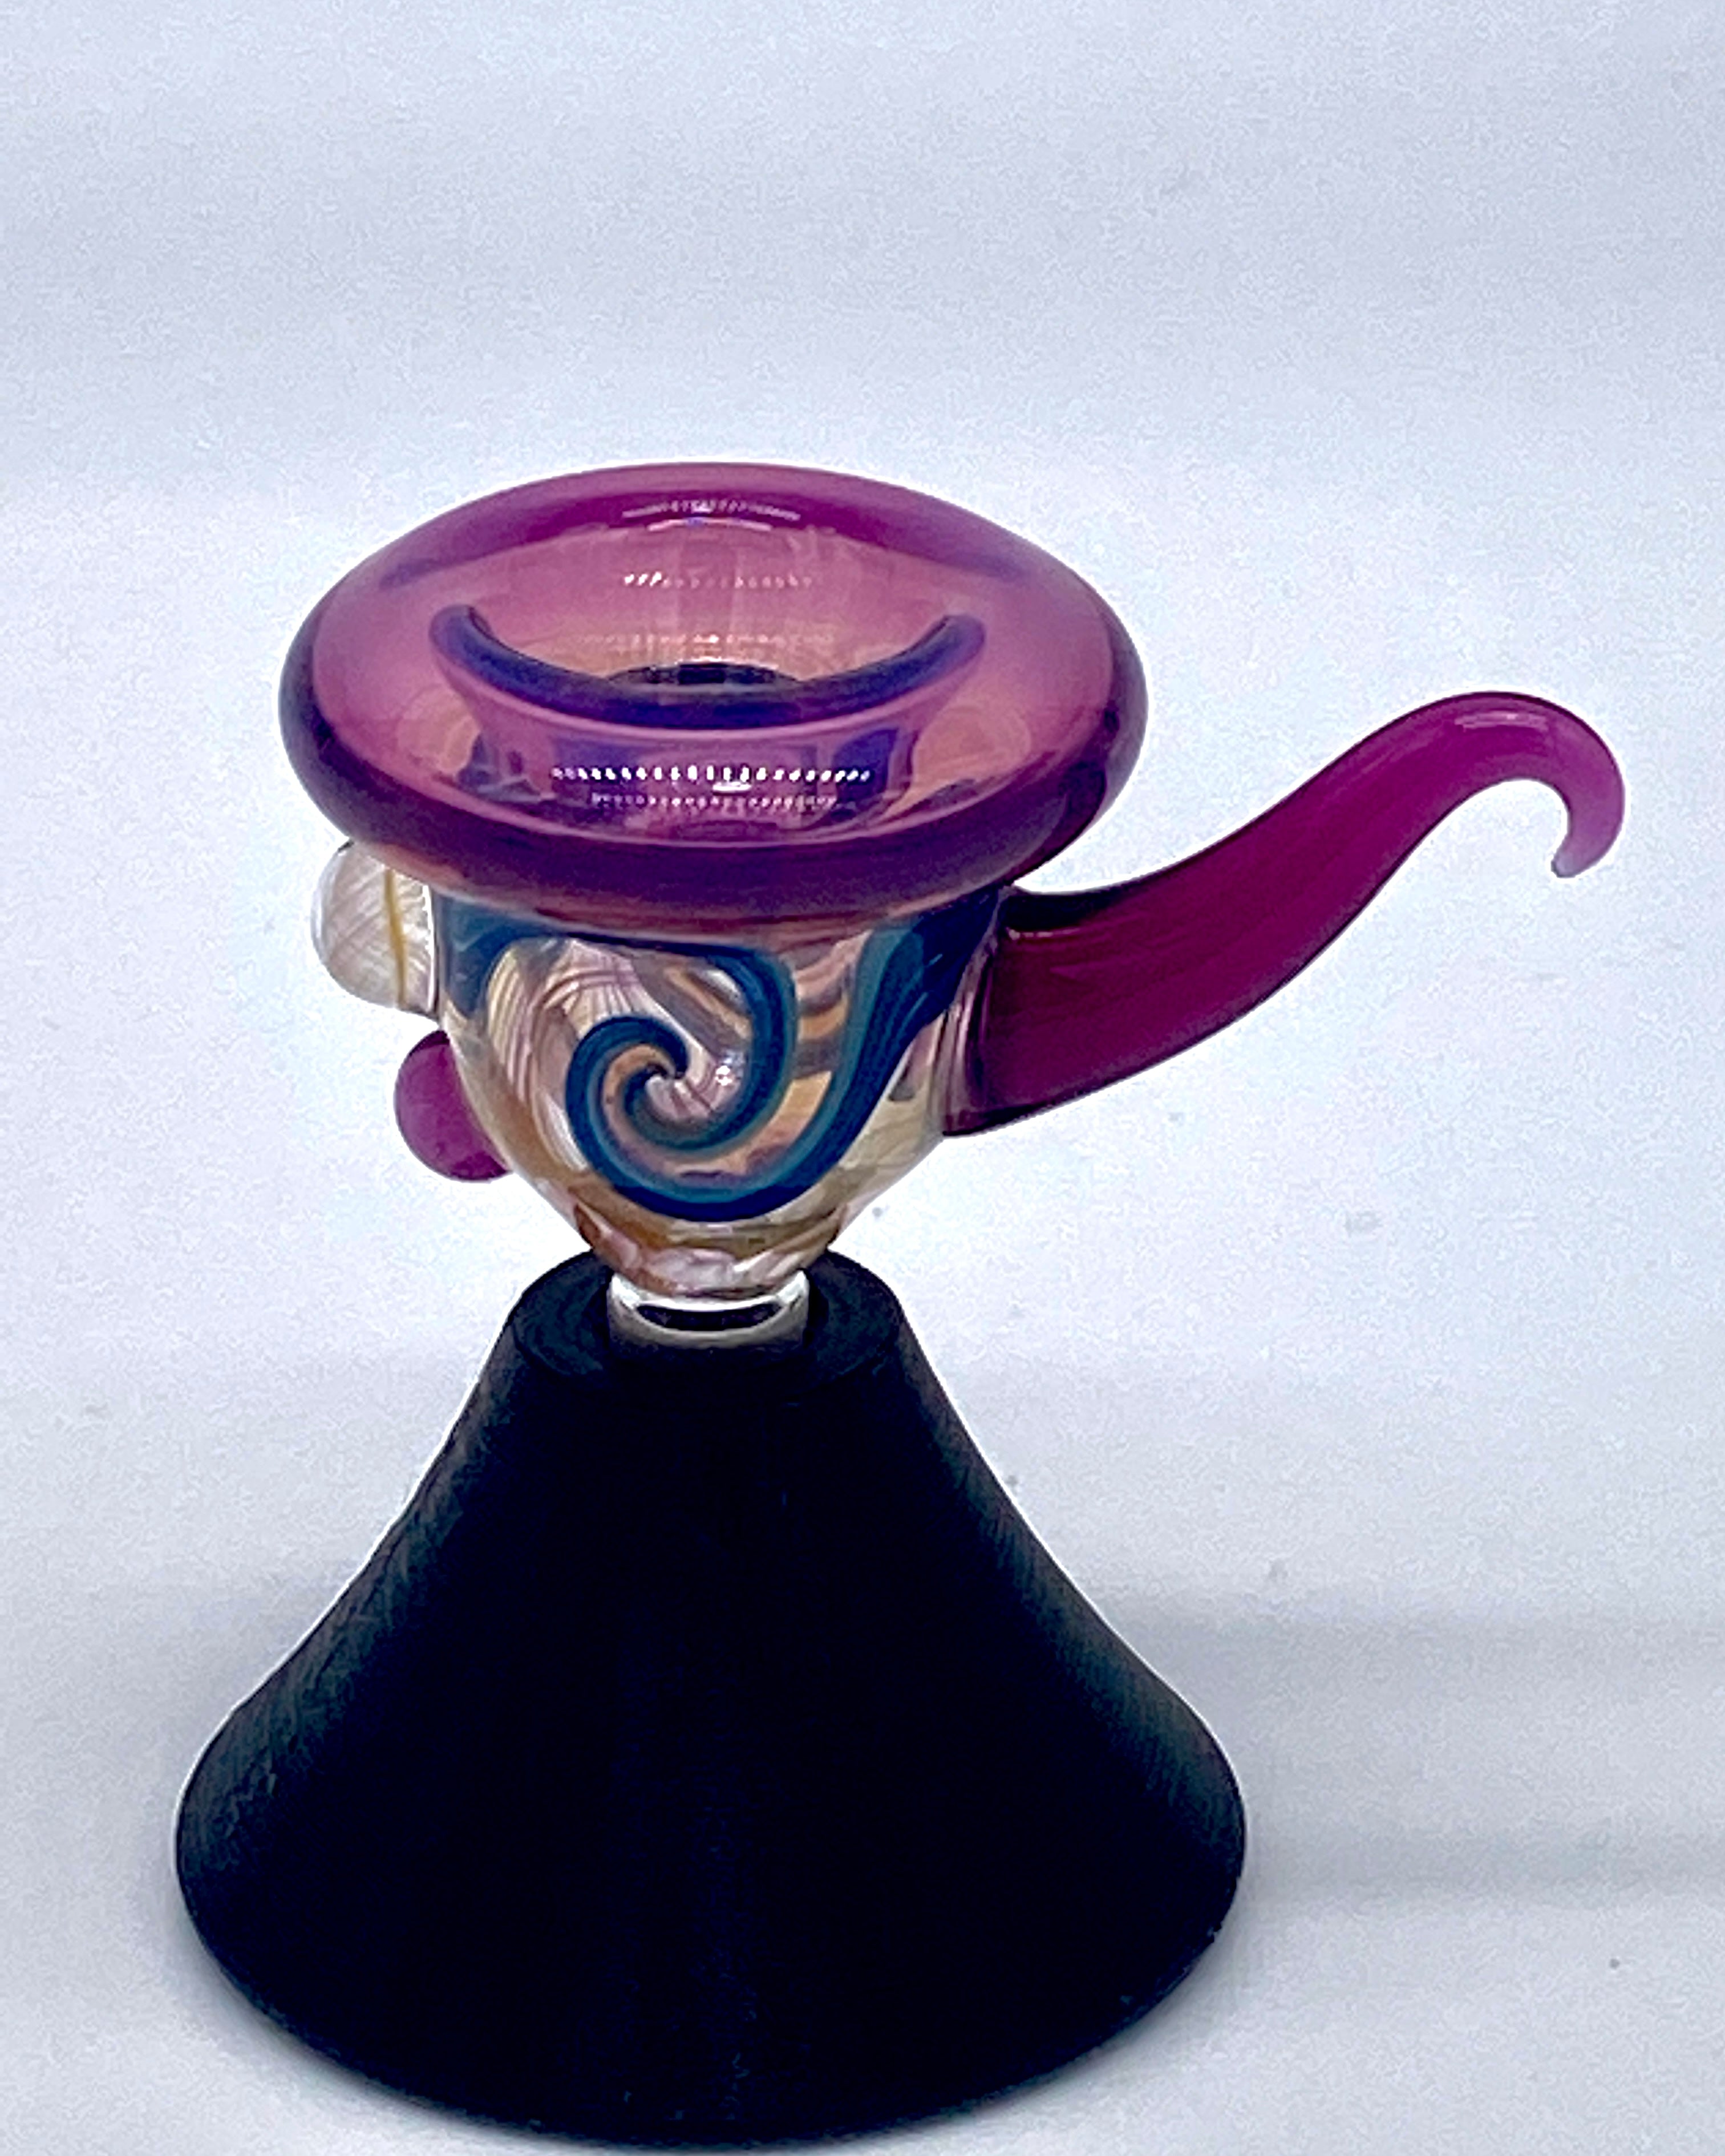 Gasp One Royal Jelly & Fumed 10mm Single Hole Slide - TheSmokeyMcPotz Collection 